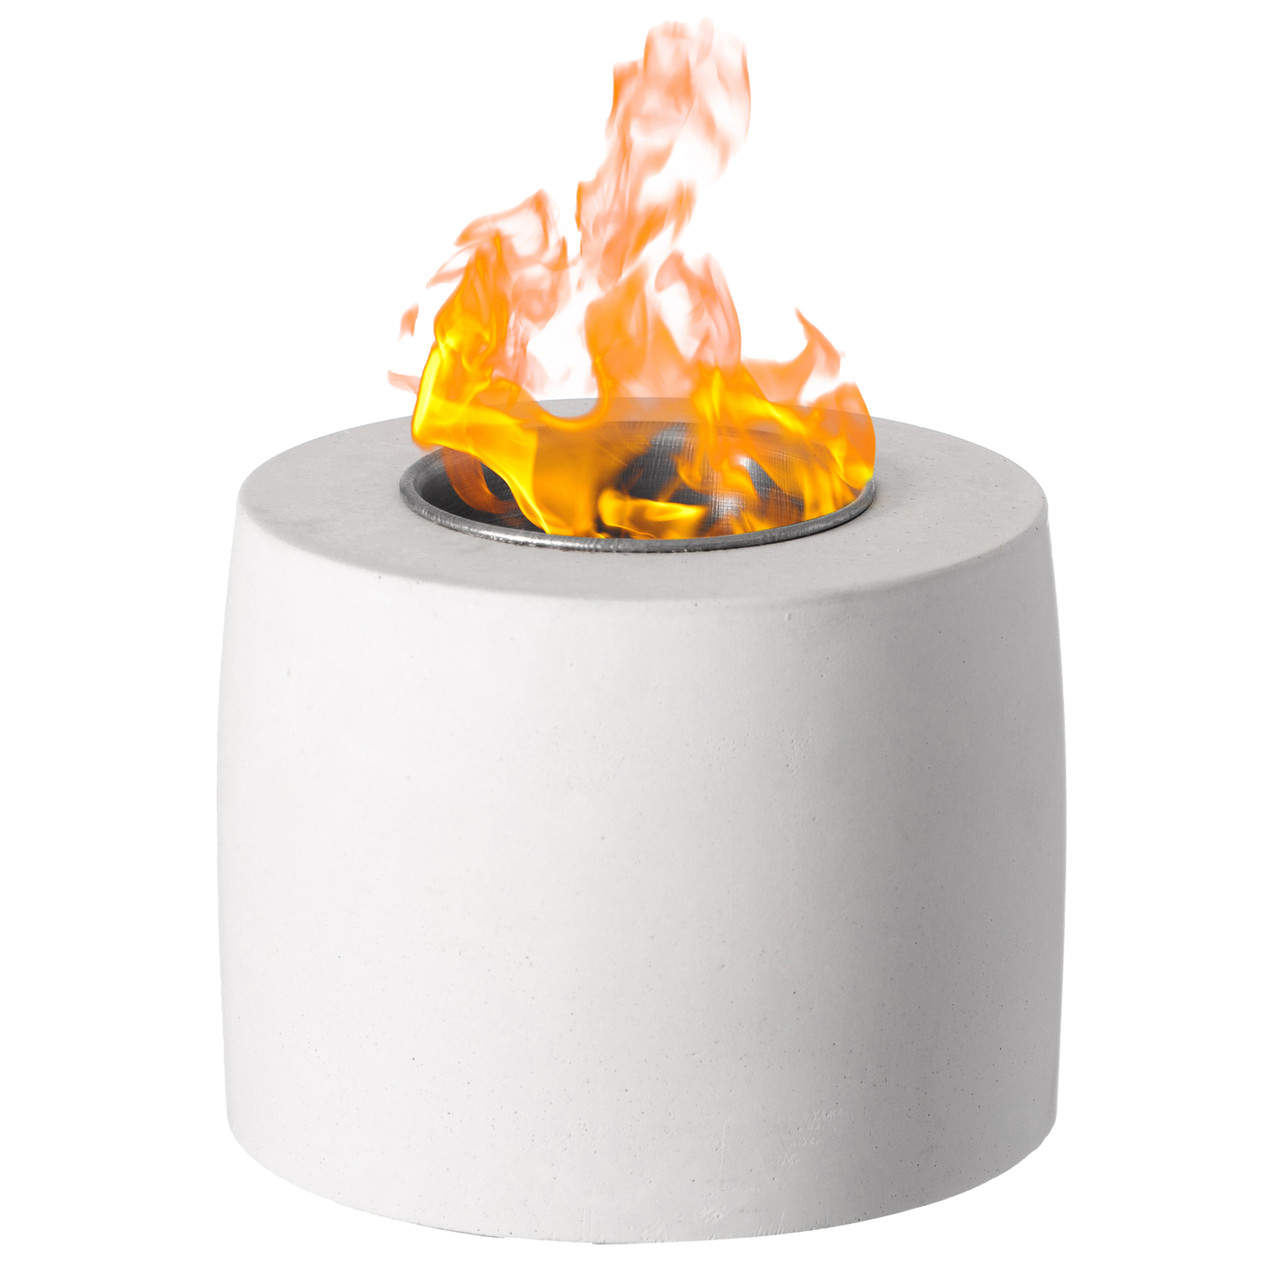 Tabletop Fire Pit for Patio-Use Gel Fuel Cans,Bioethanol/Isopropyl